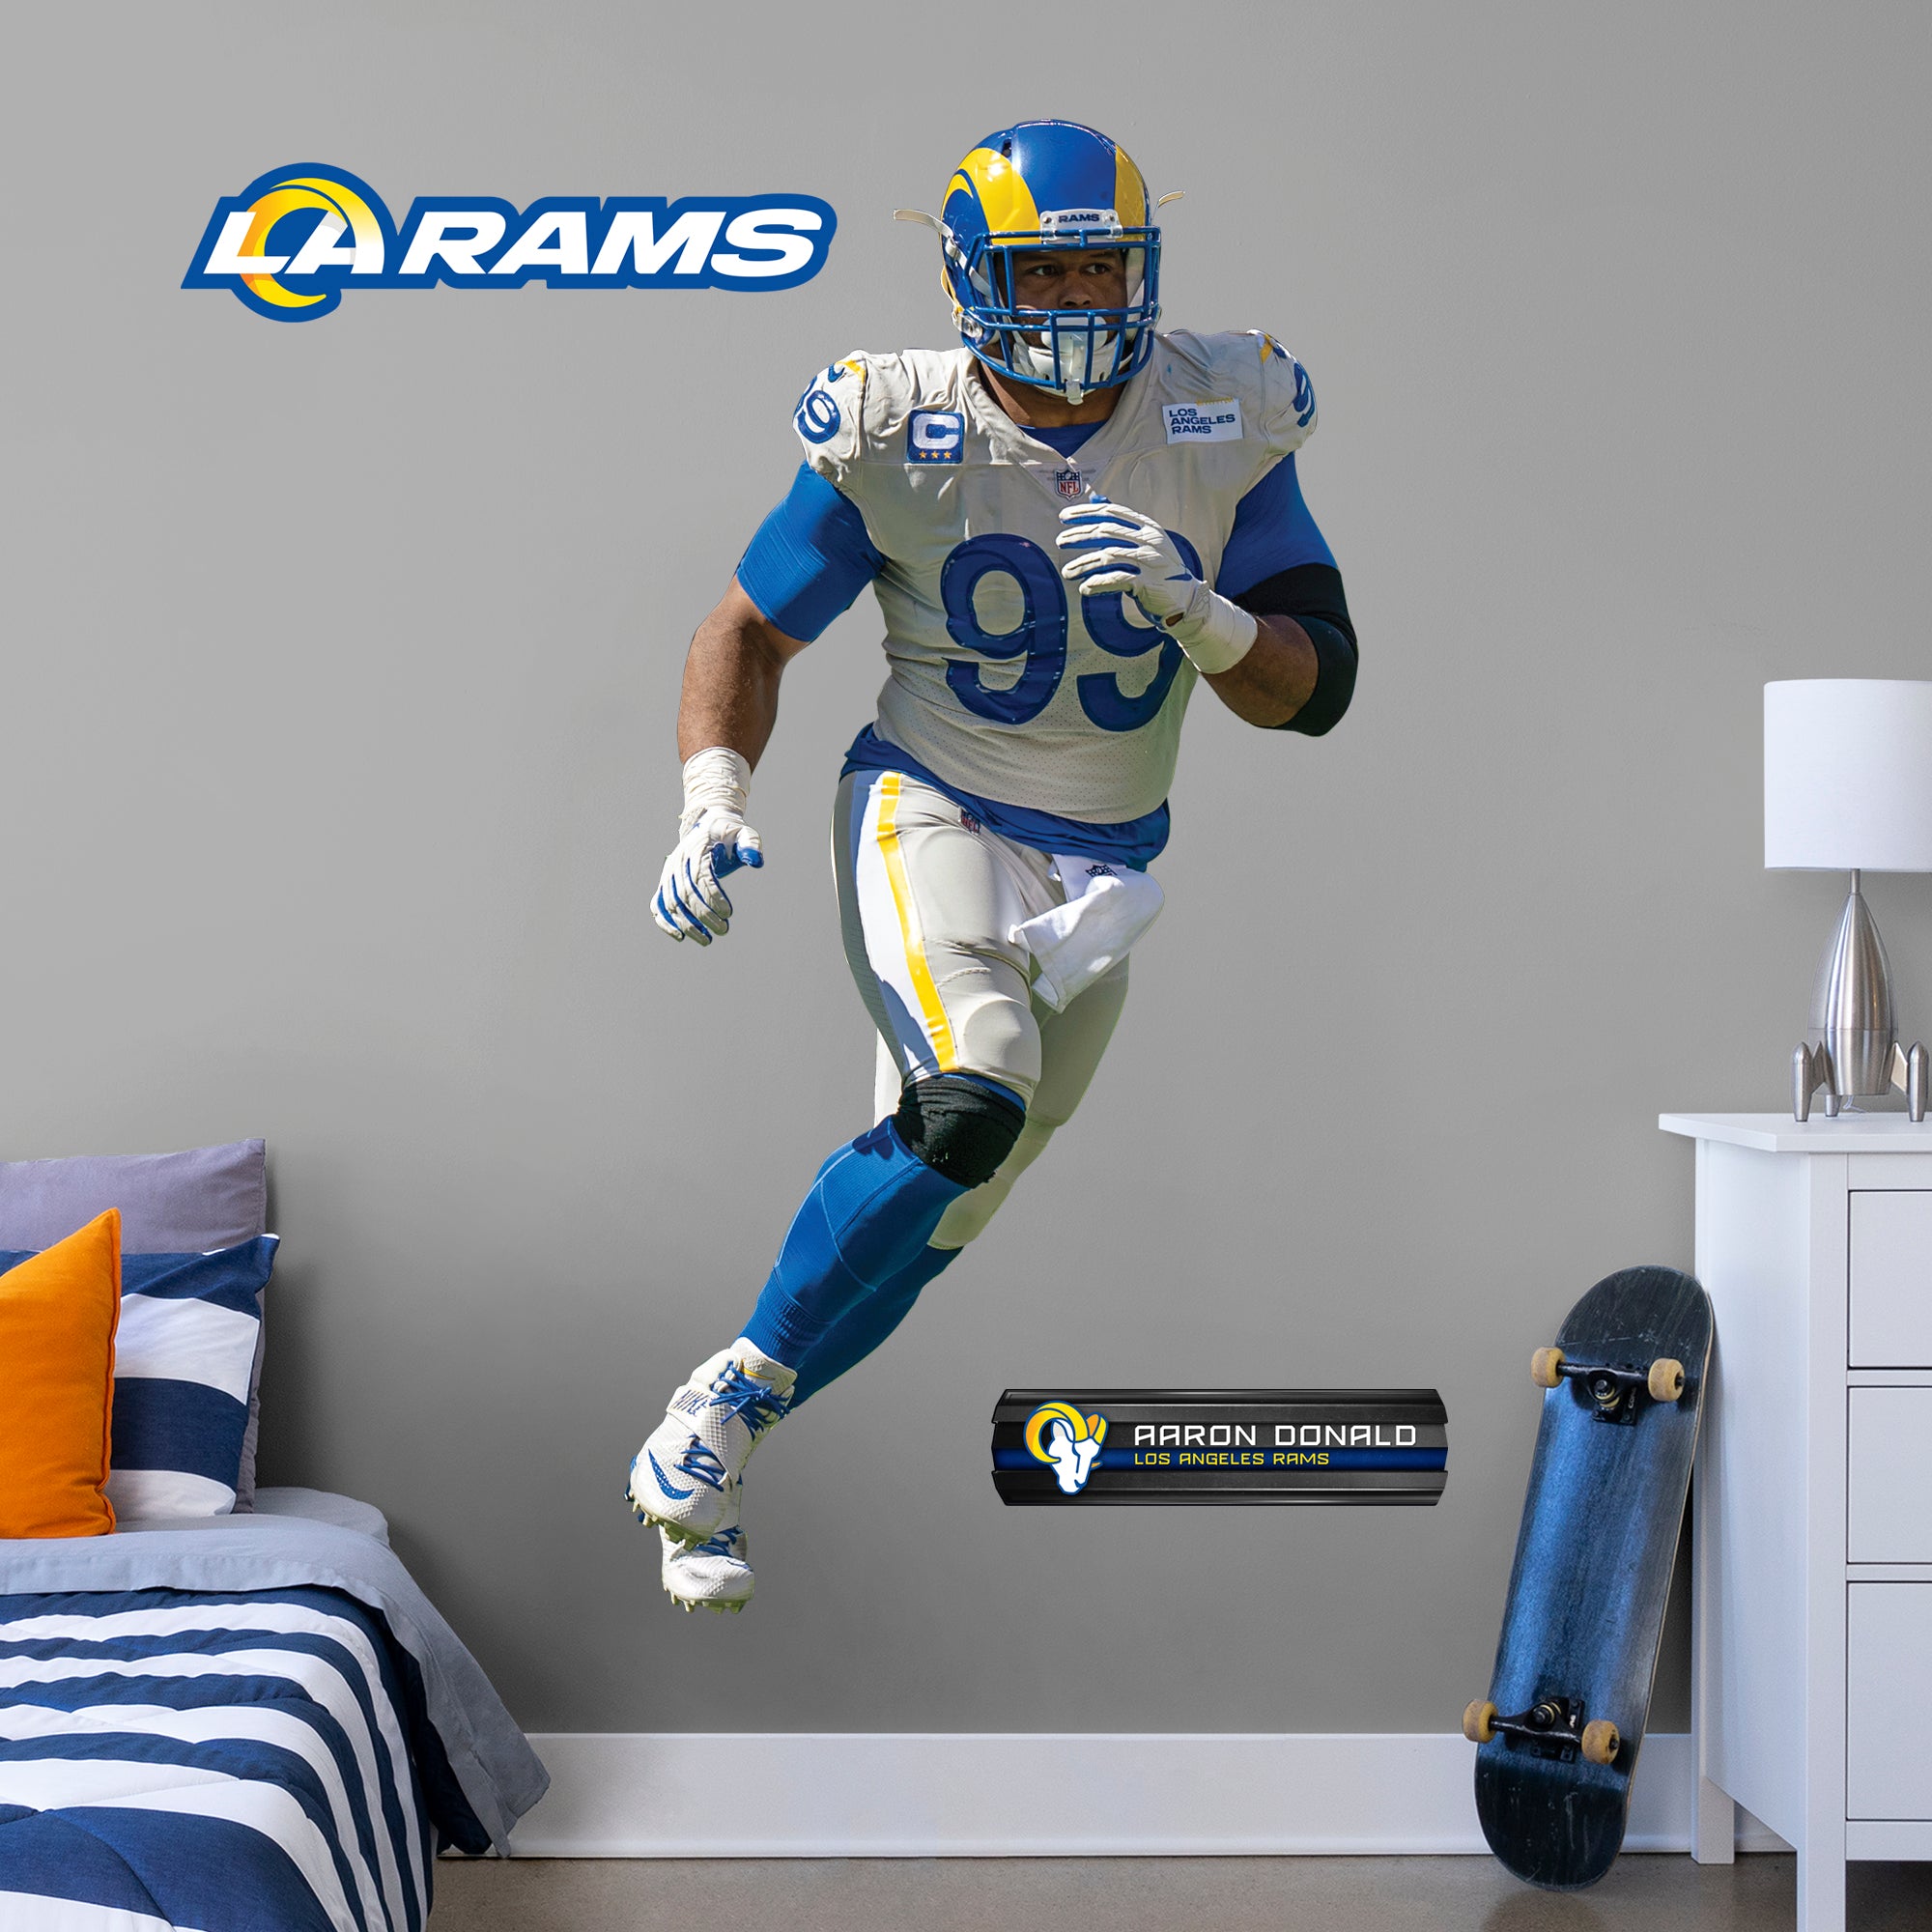 Aaron Donald: RealBig Officially Licensed NFL Removable Wall Decal Life-Size Athlete + 2 Decals by Fathead | Vinyl